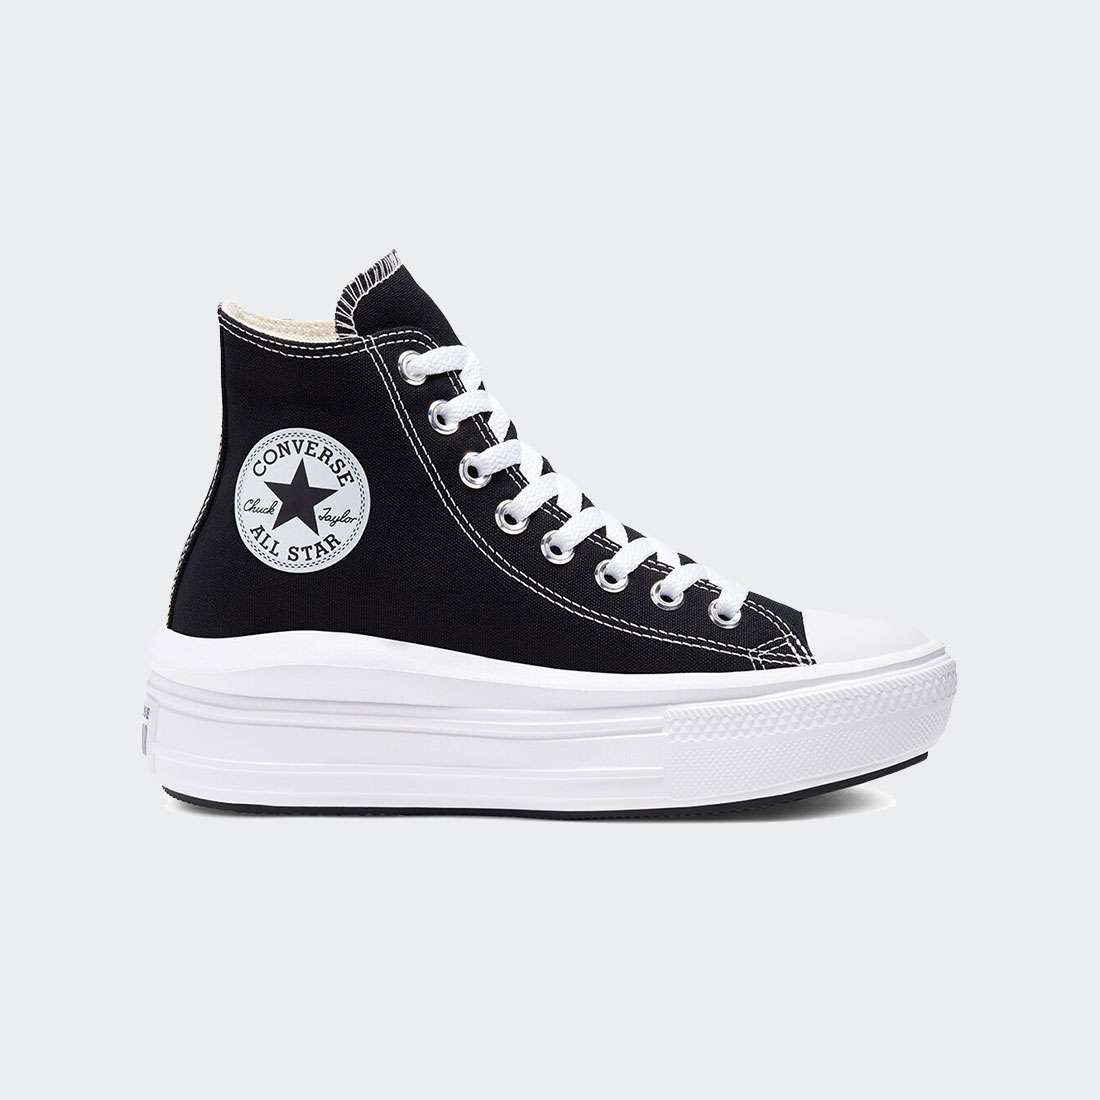 CONVERSE CHUCK TAYLOR ALL STAR HIGH TOP MOVE BLACK/NATURAL IVORY/WHITE